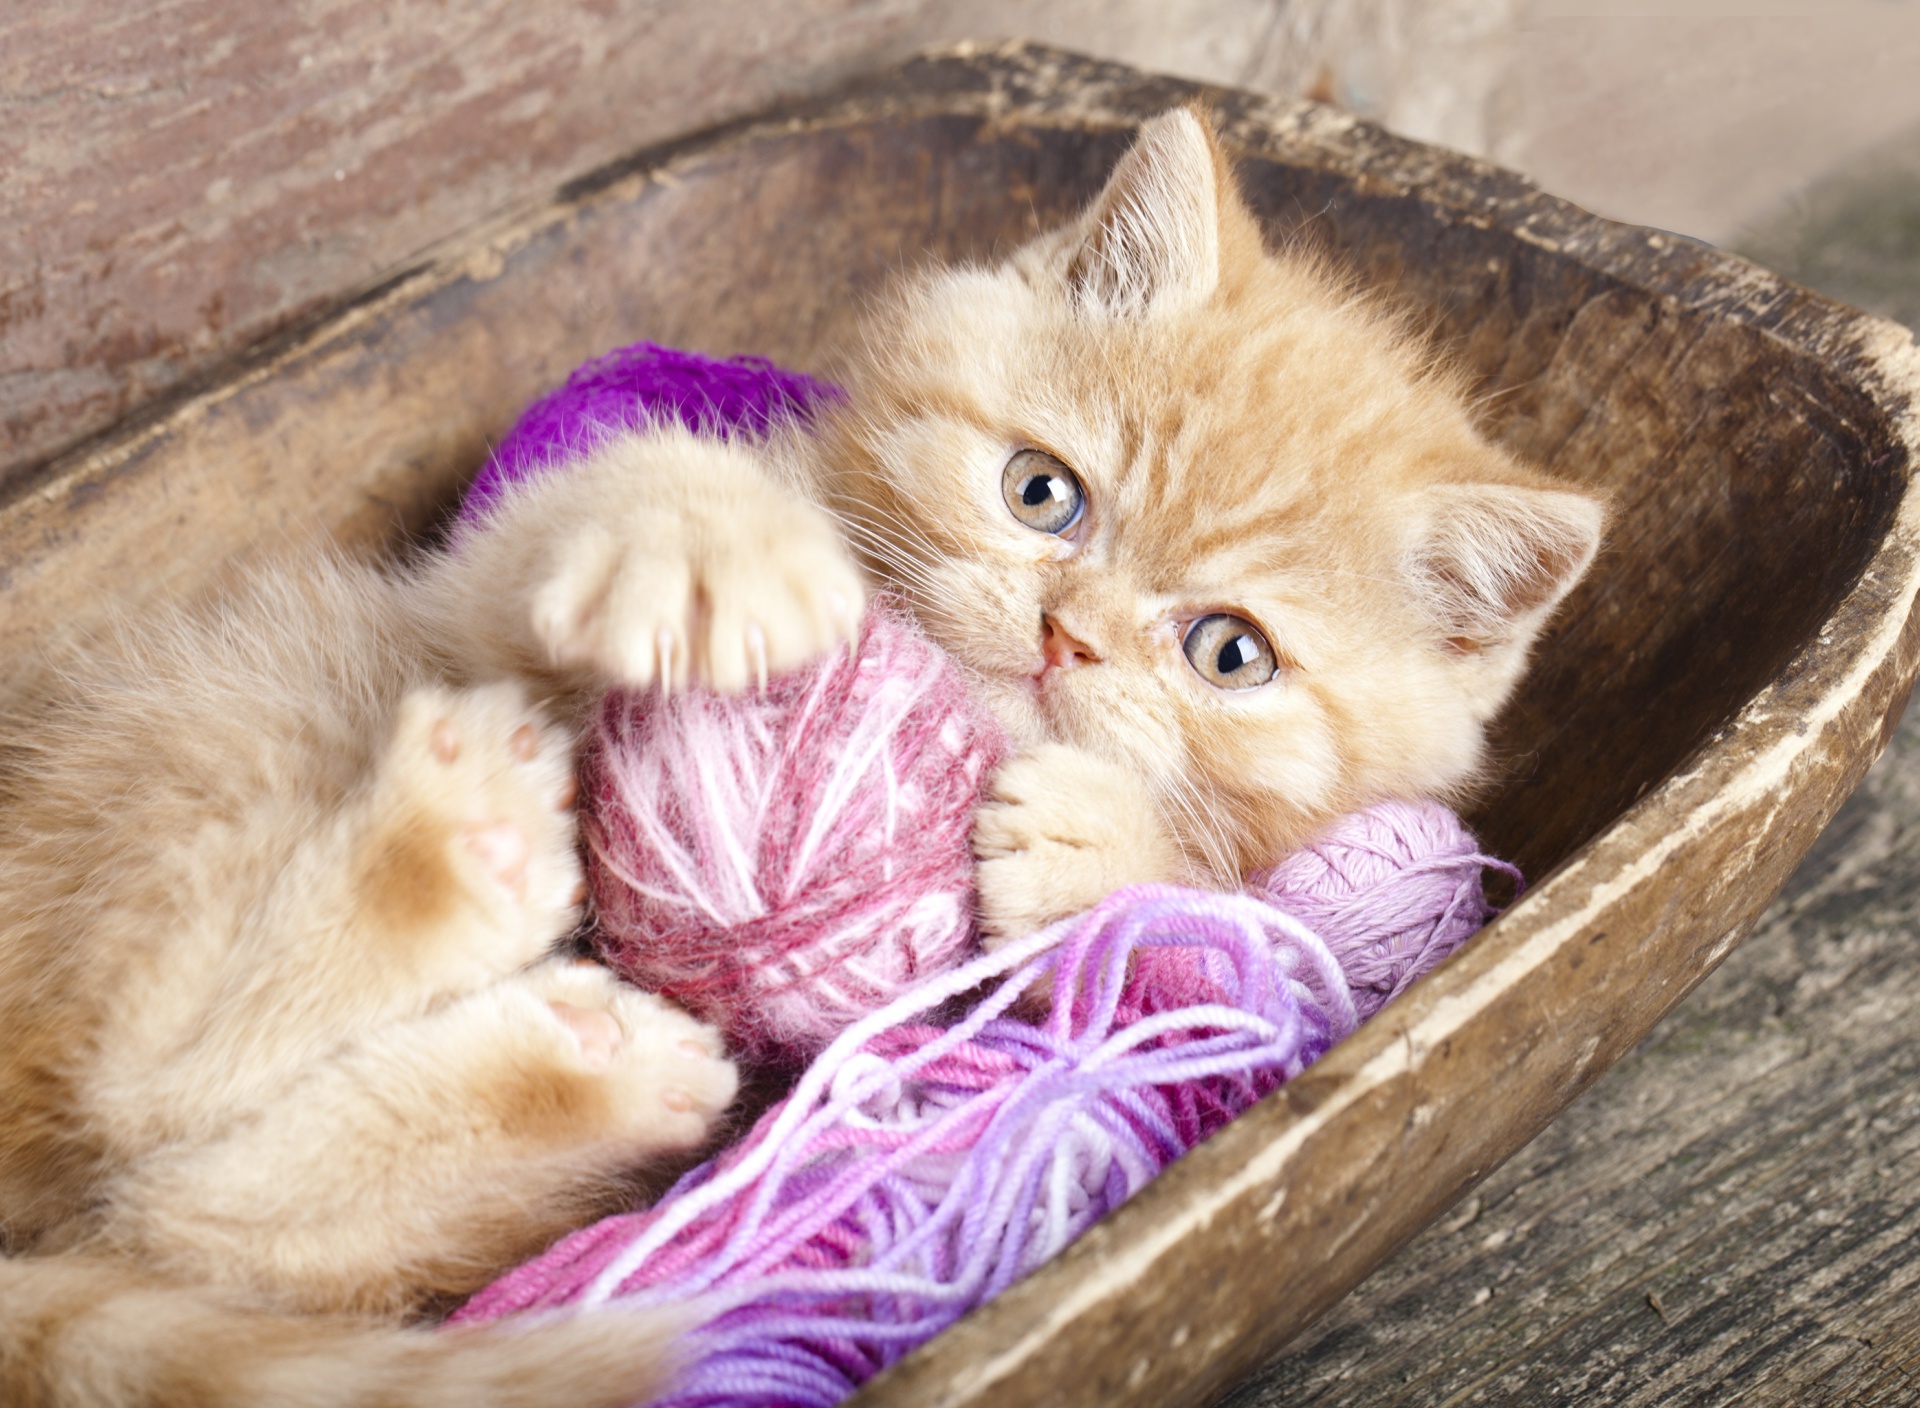 Cute Kitten Playing With A Ball Of Yarn wallpaper 1920x1408